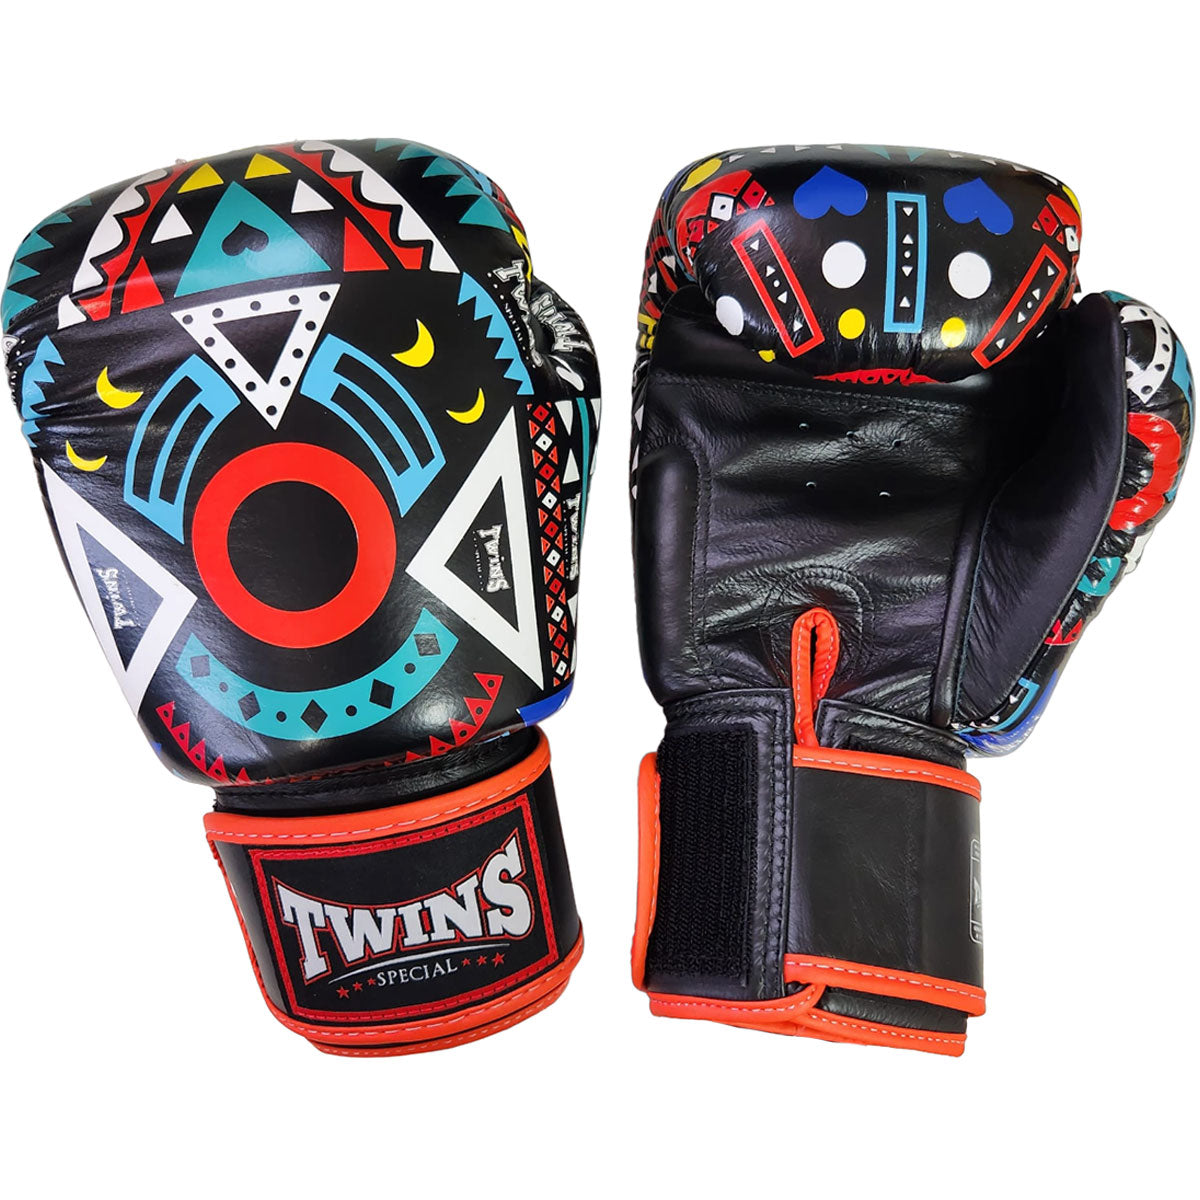 Boxing Gloves Twins Special FBGV-57 Black Fancy